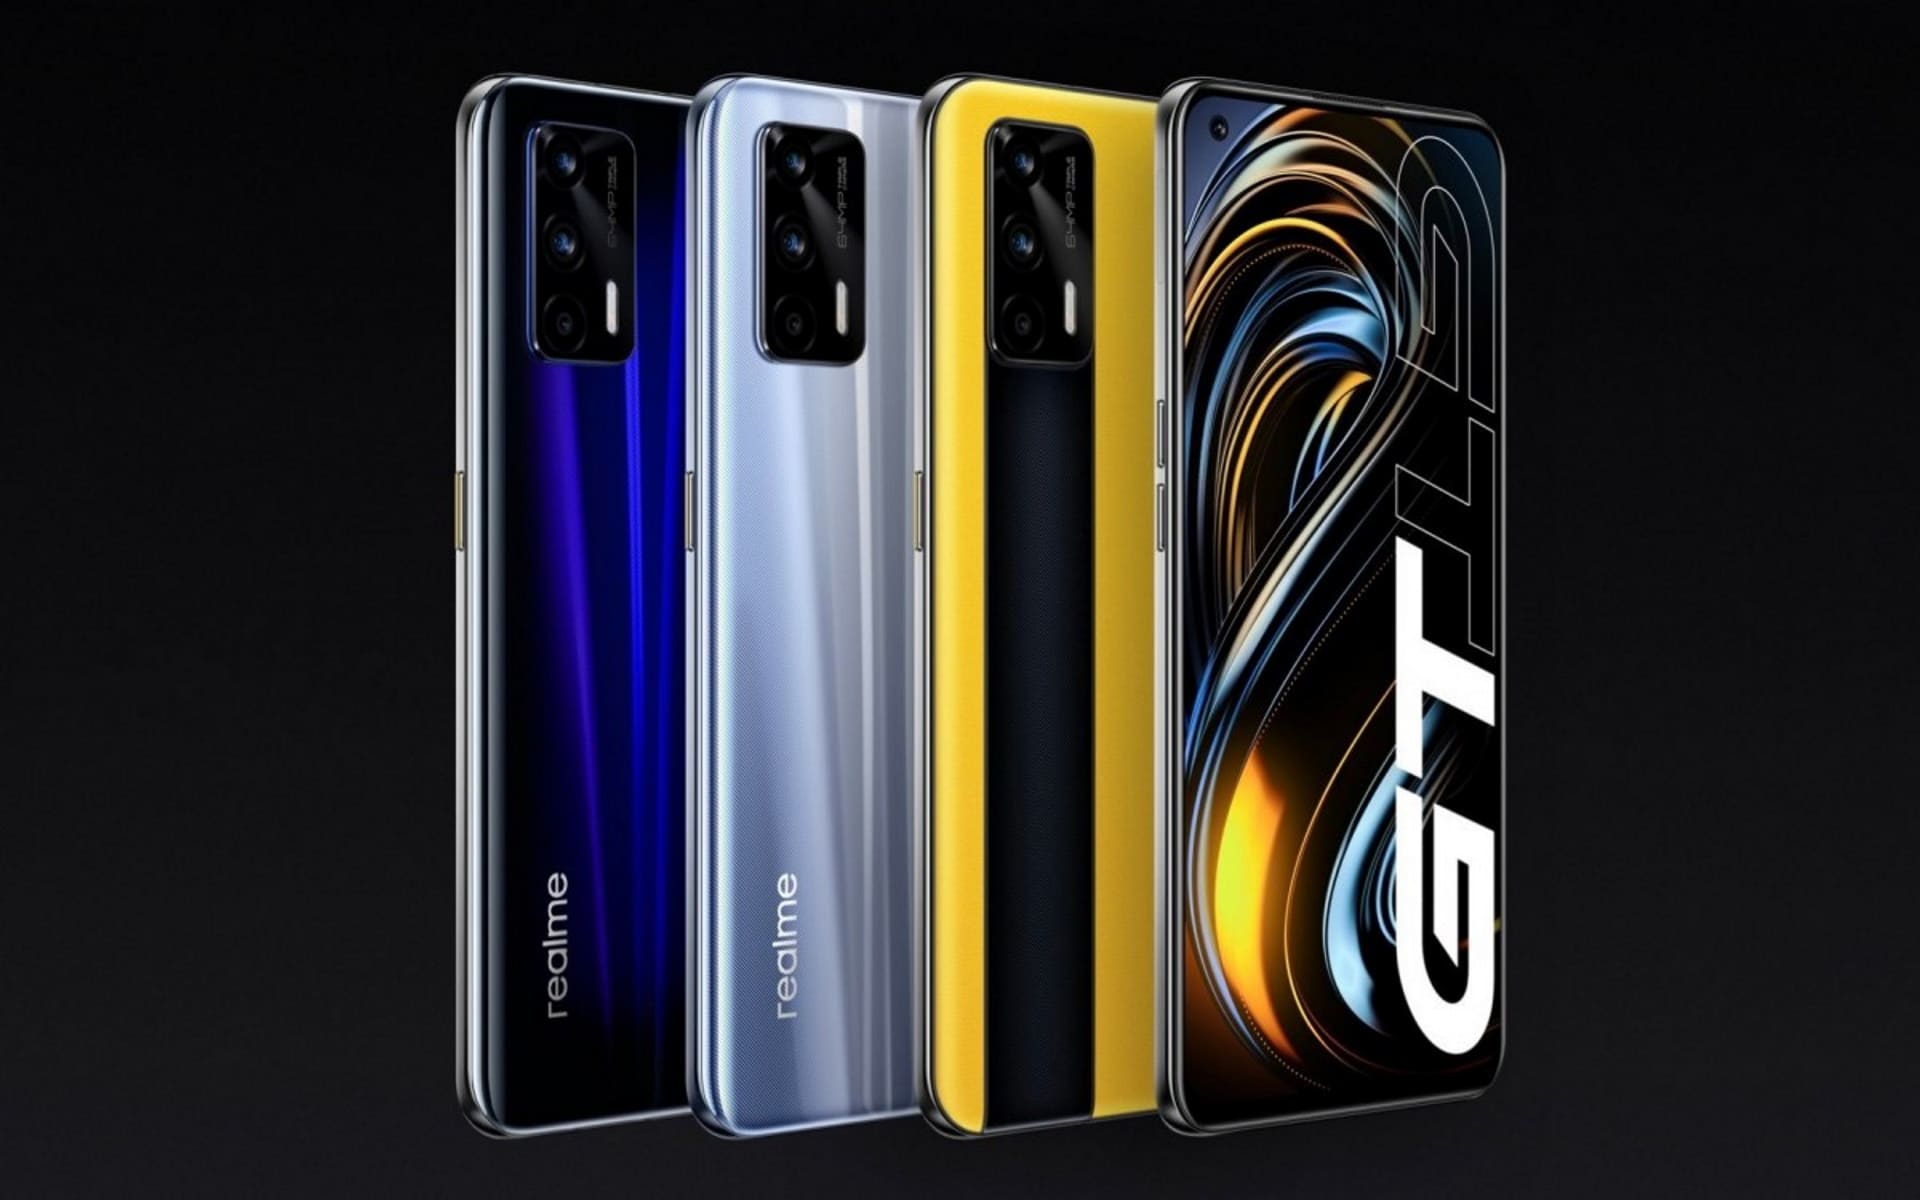  Three Realme GT 6 phones in different colors are displayed from the back.